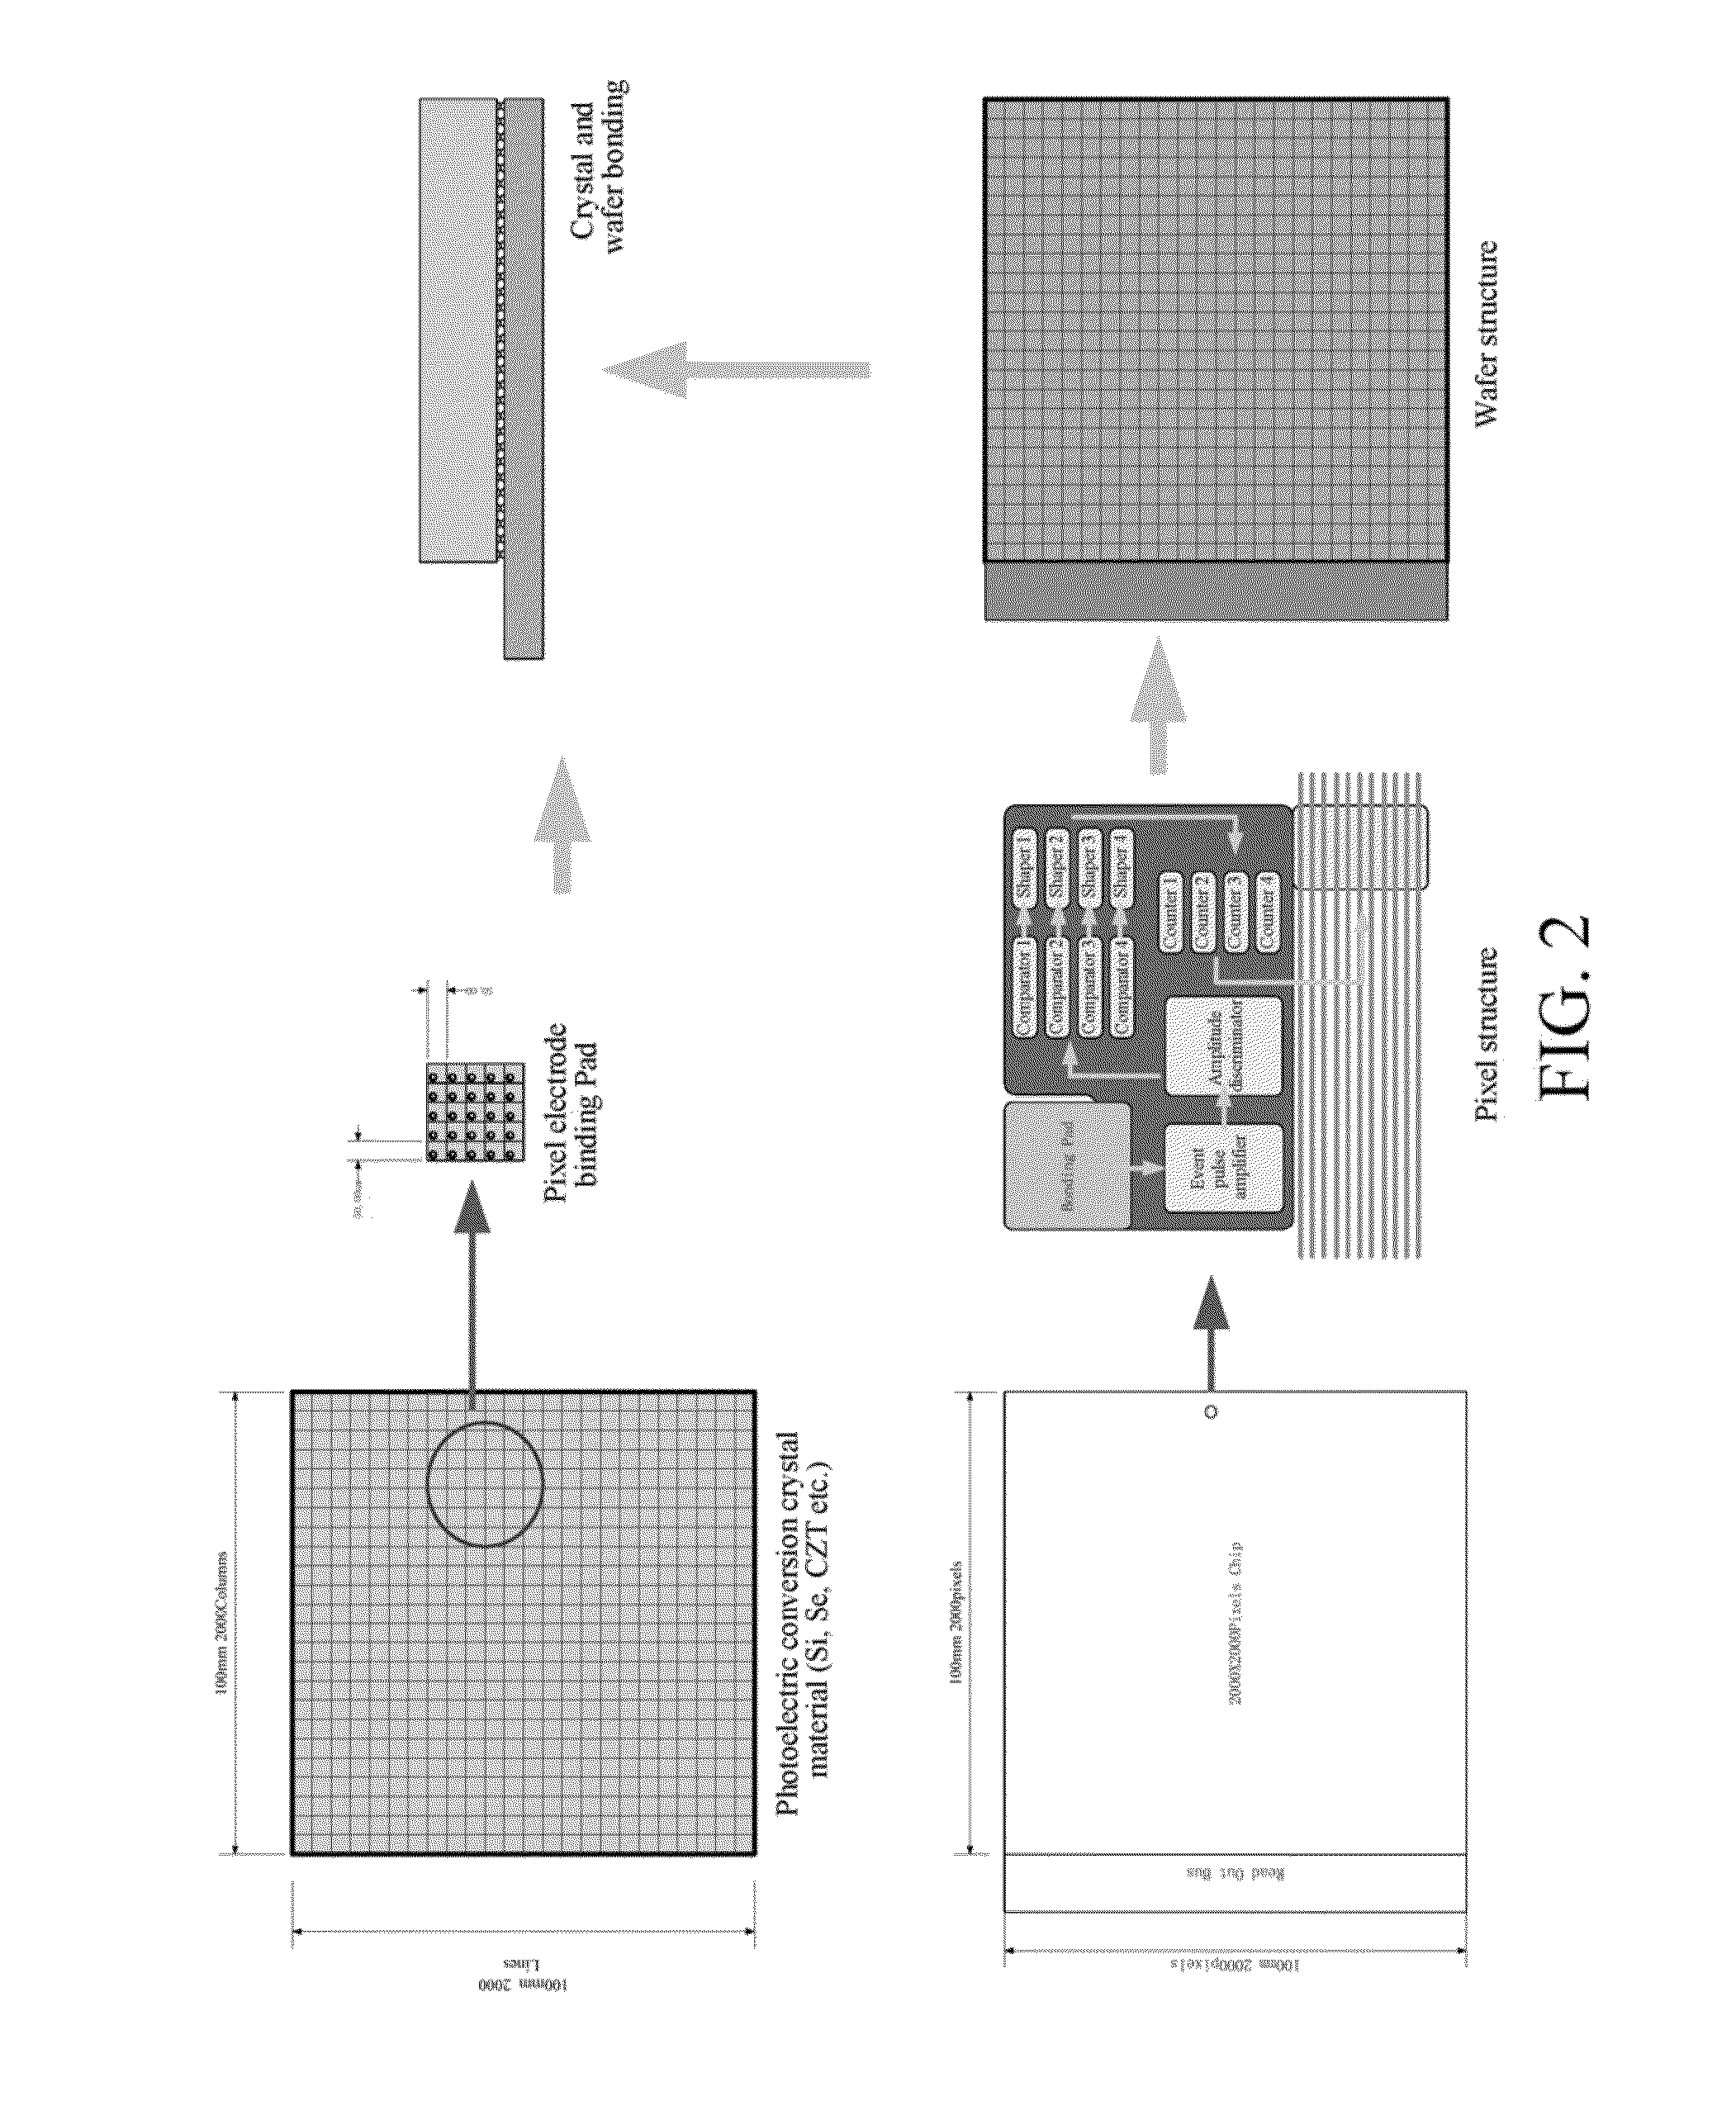 Photon count-based radiation imaging system, method and device thereof